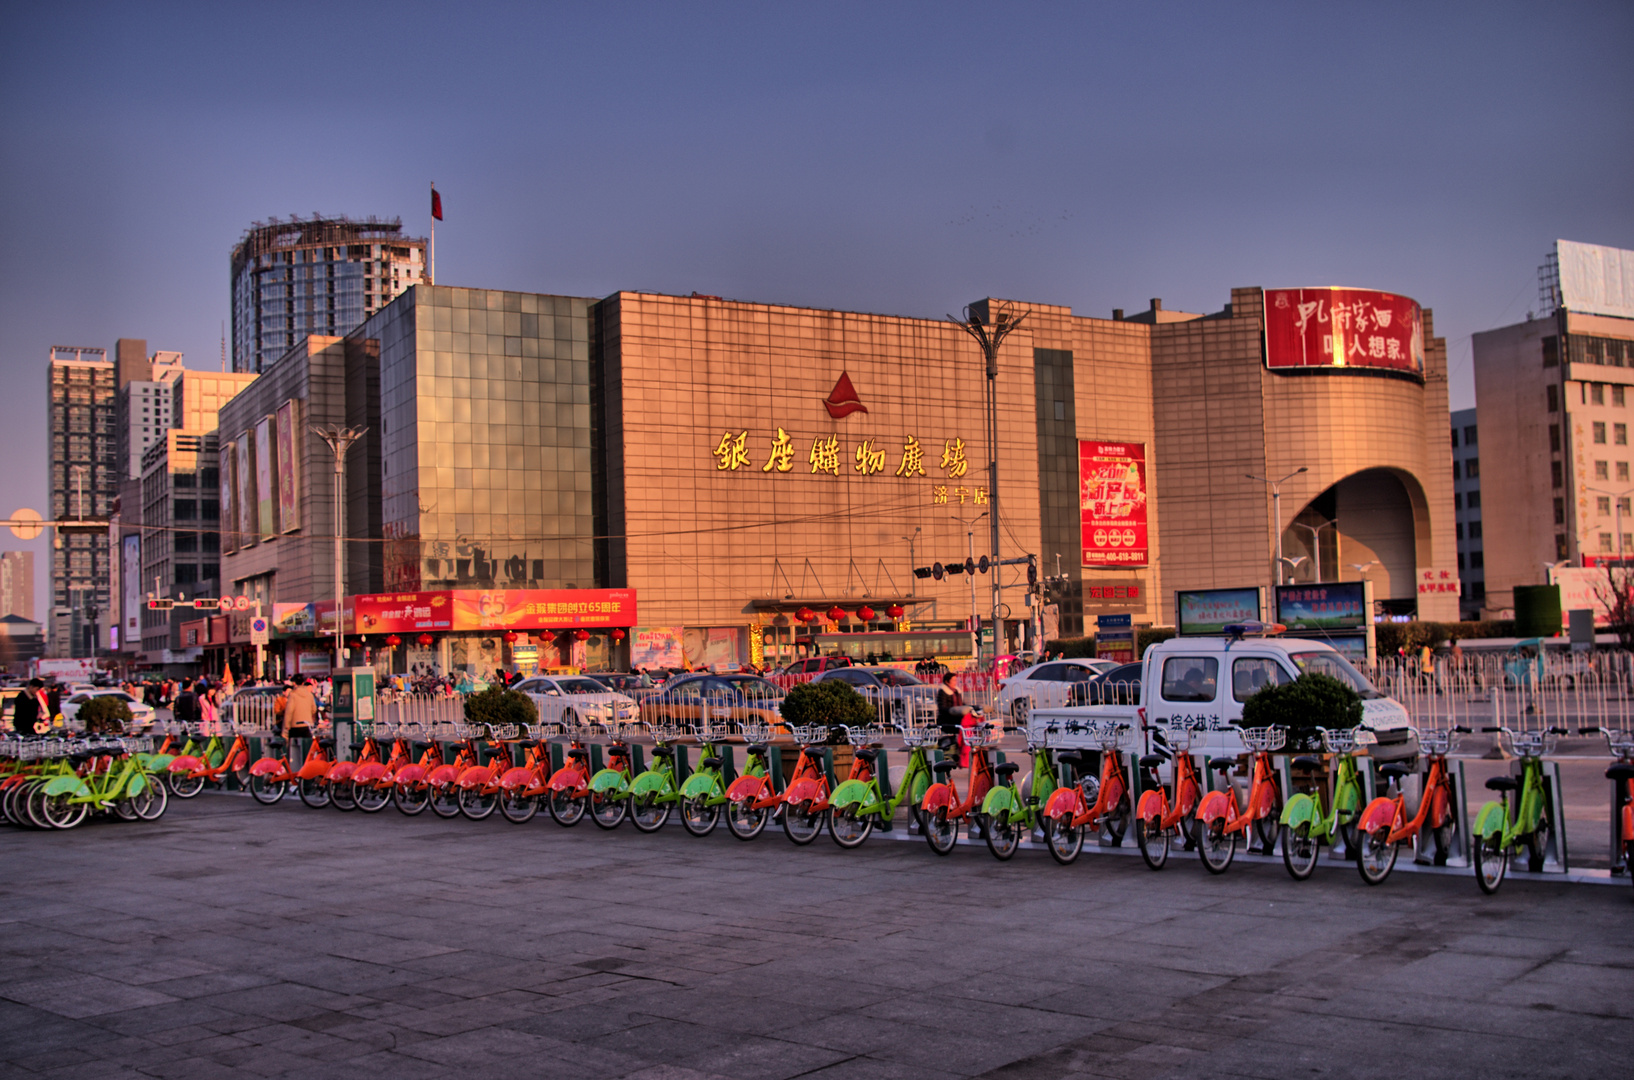 10 million bicycles in Jining